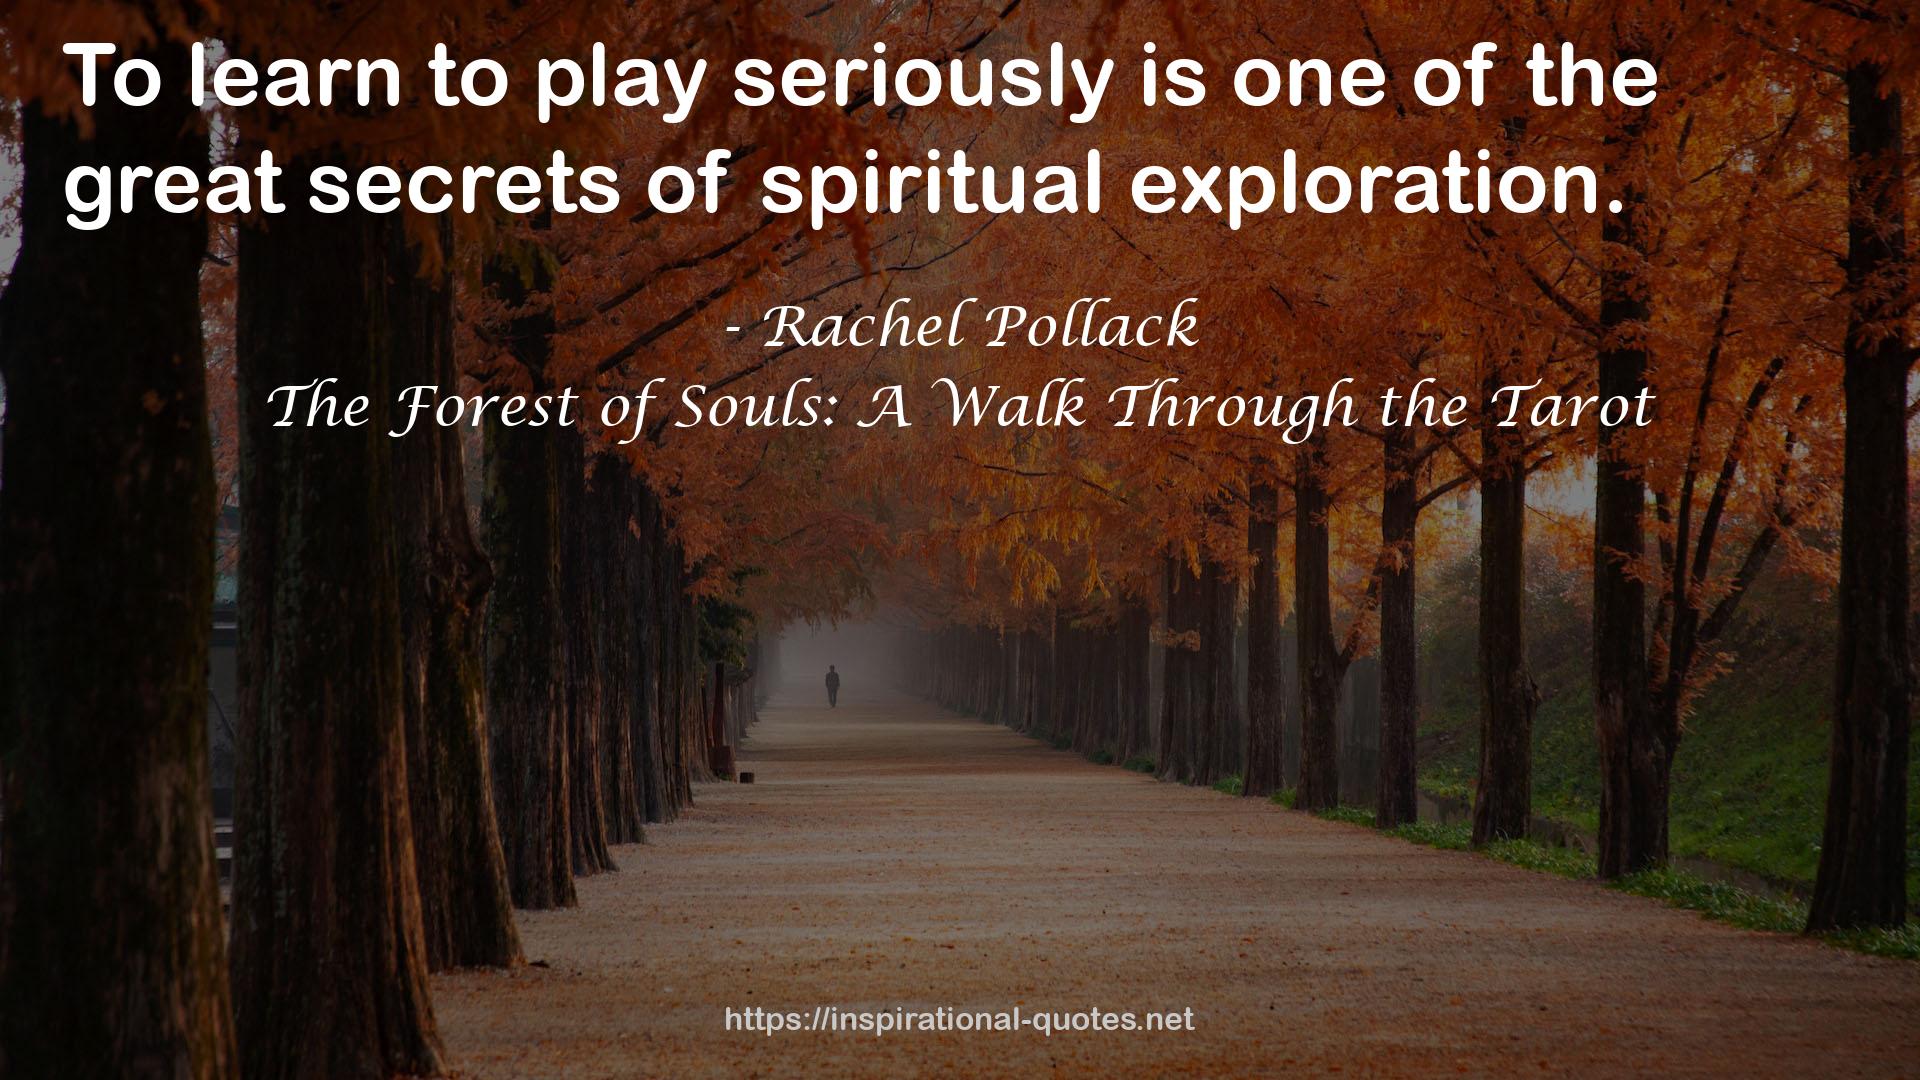 The Forest of Souls: A Walk Through the Tarot QUOTES